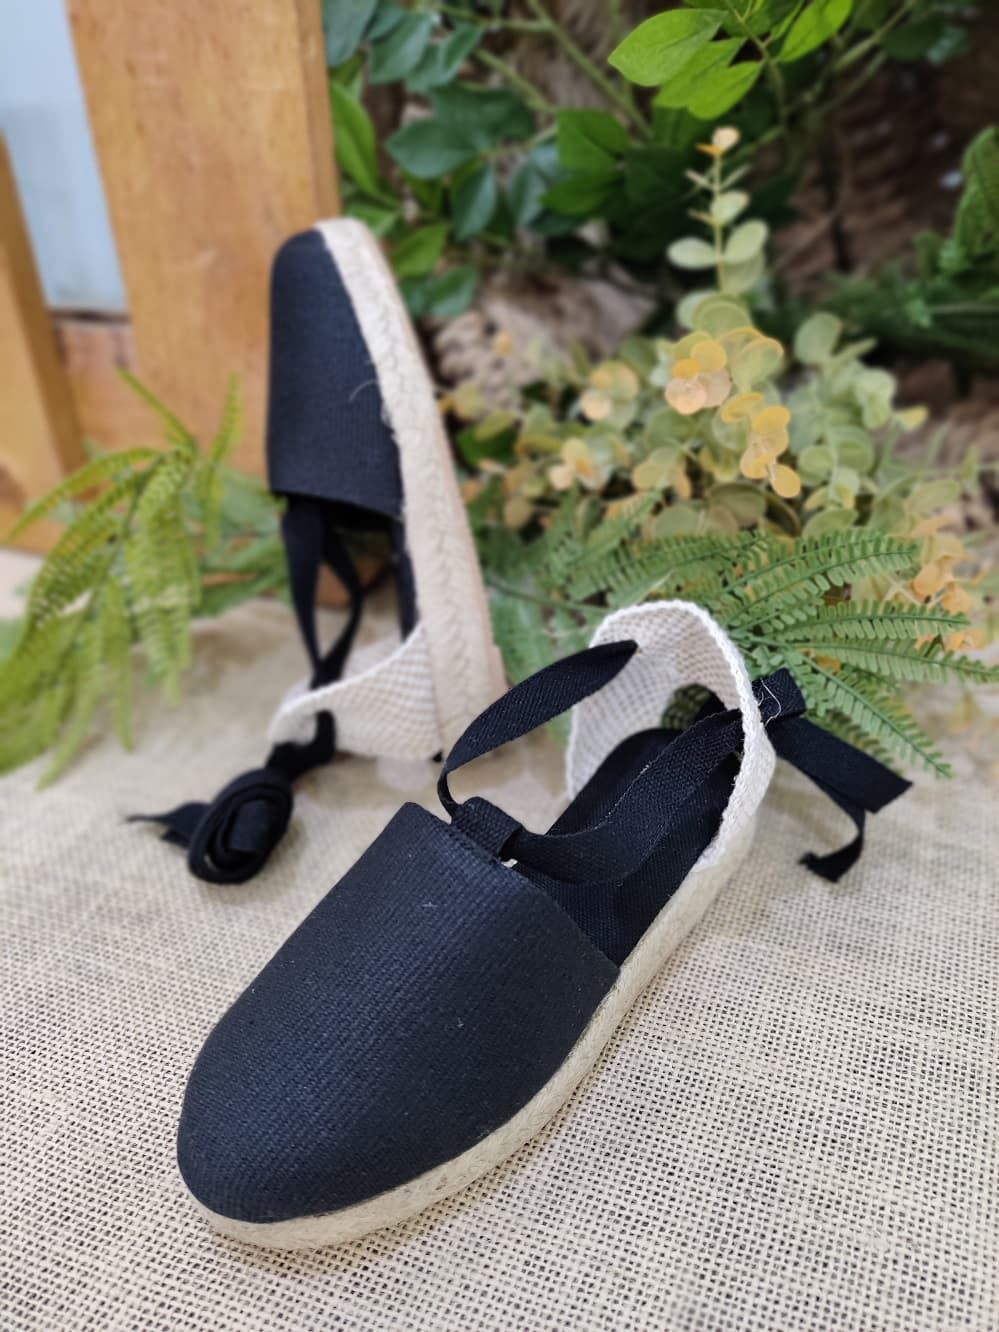 Black wedge espadrilles with ribbons for girls and women - Image 4